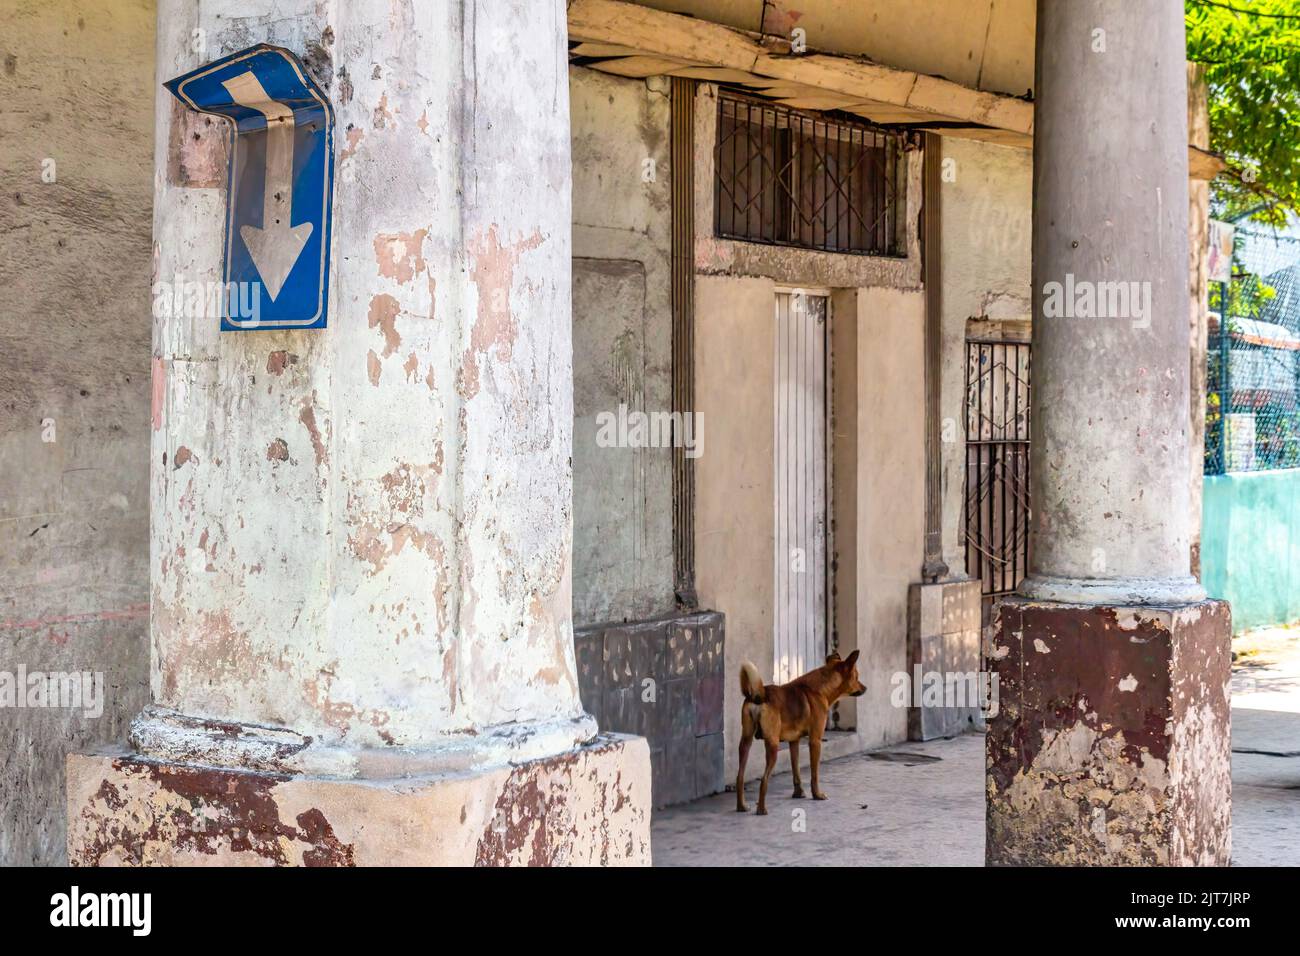 A broken traffic sign in a column of a weathered porch. There is a stray dog in the front of the run-down building. Stock Photo